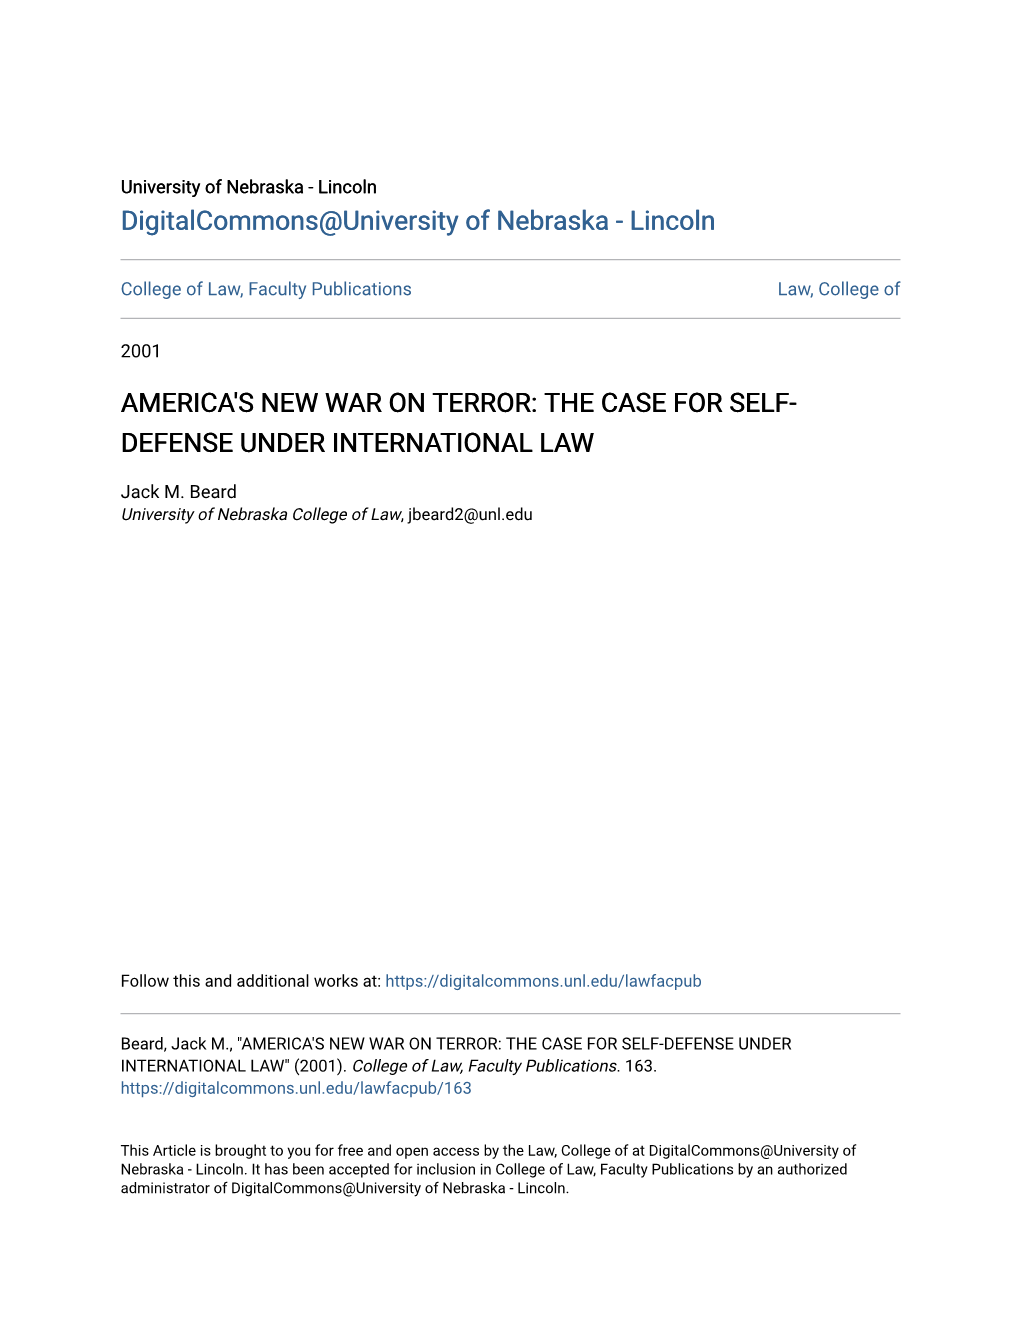 America's New War on Terror: the Case for Self-Defense Under International Law" (2001)